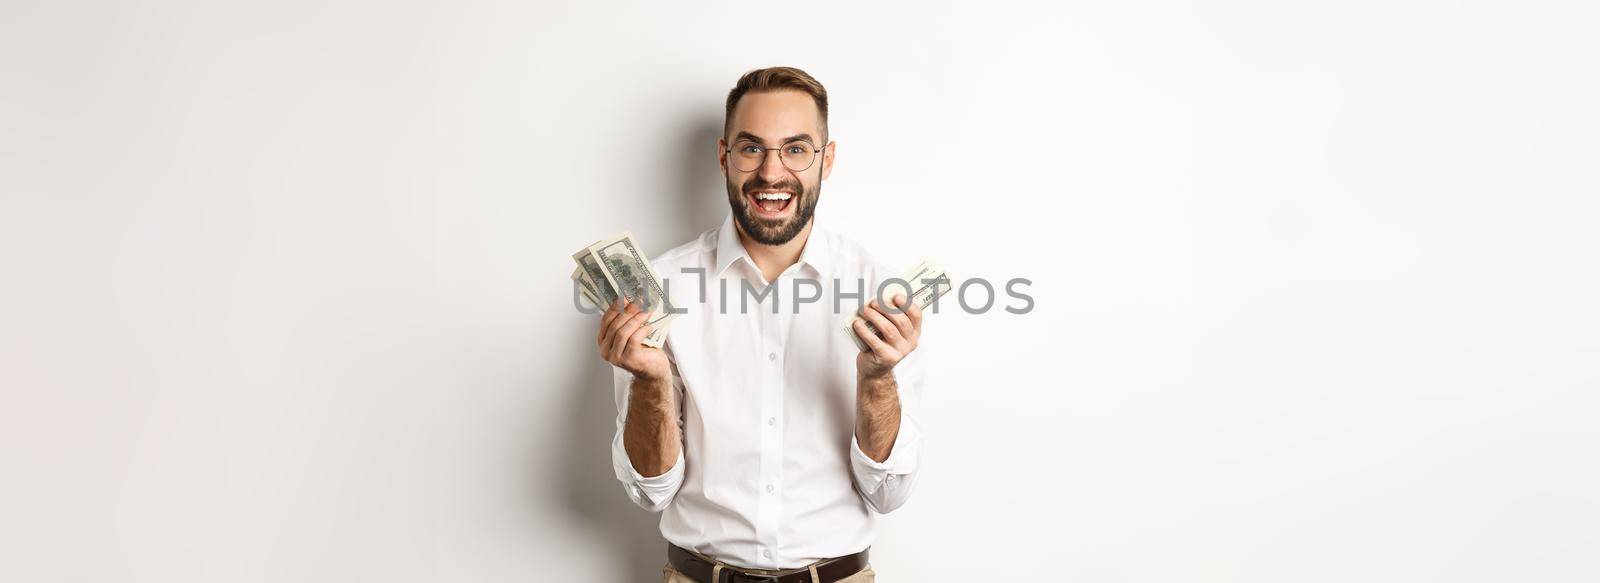 Handsome successful business man counting money, rejoicing and smiling, standing over white background.